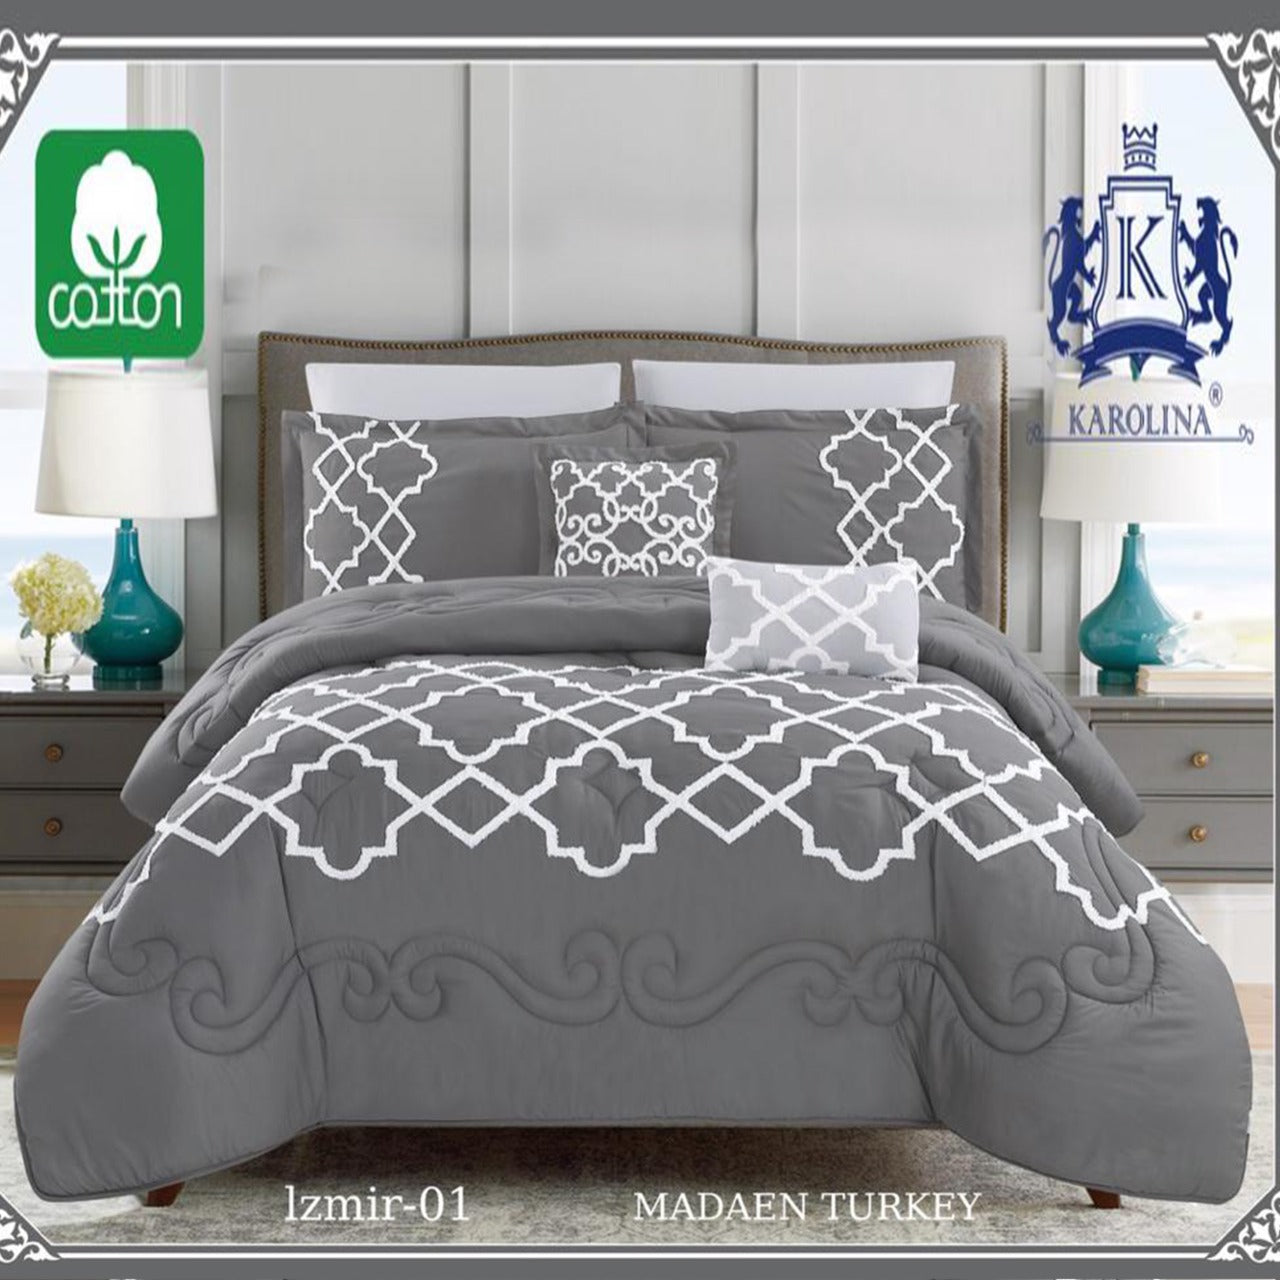 10 Piece Comforter Bedding With Sheet and Decorative Pillow Shams | Made in Turkey Izmir - 01